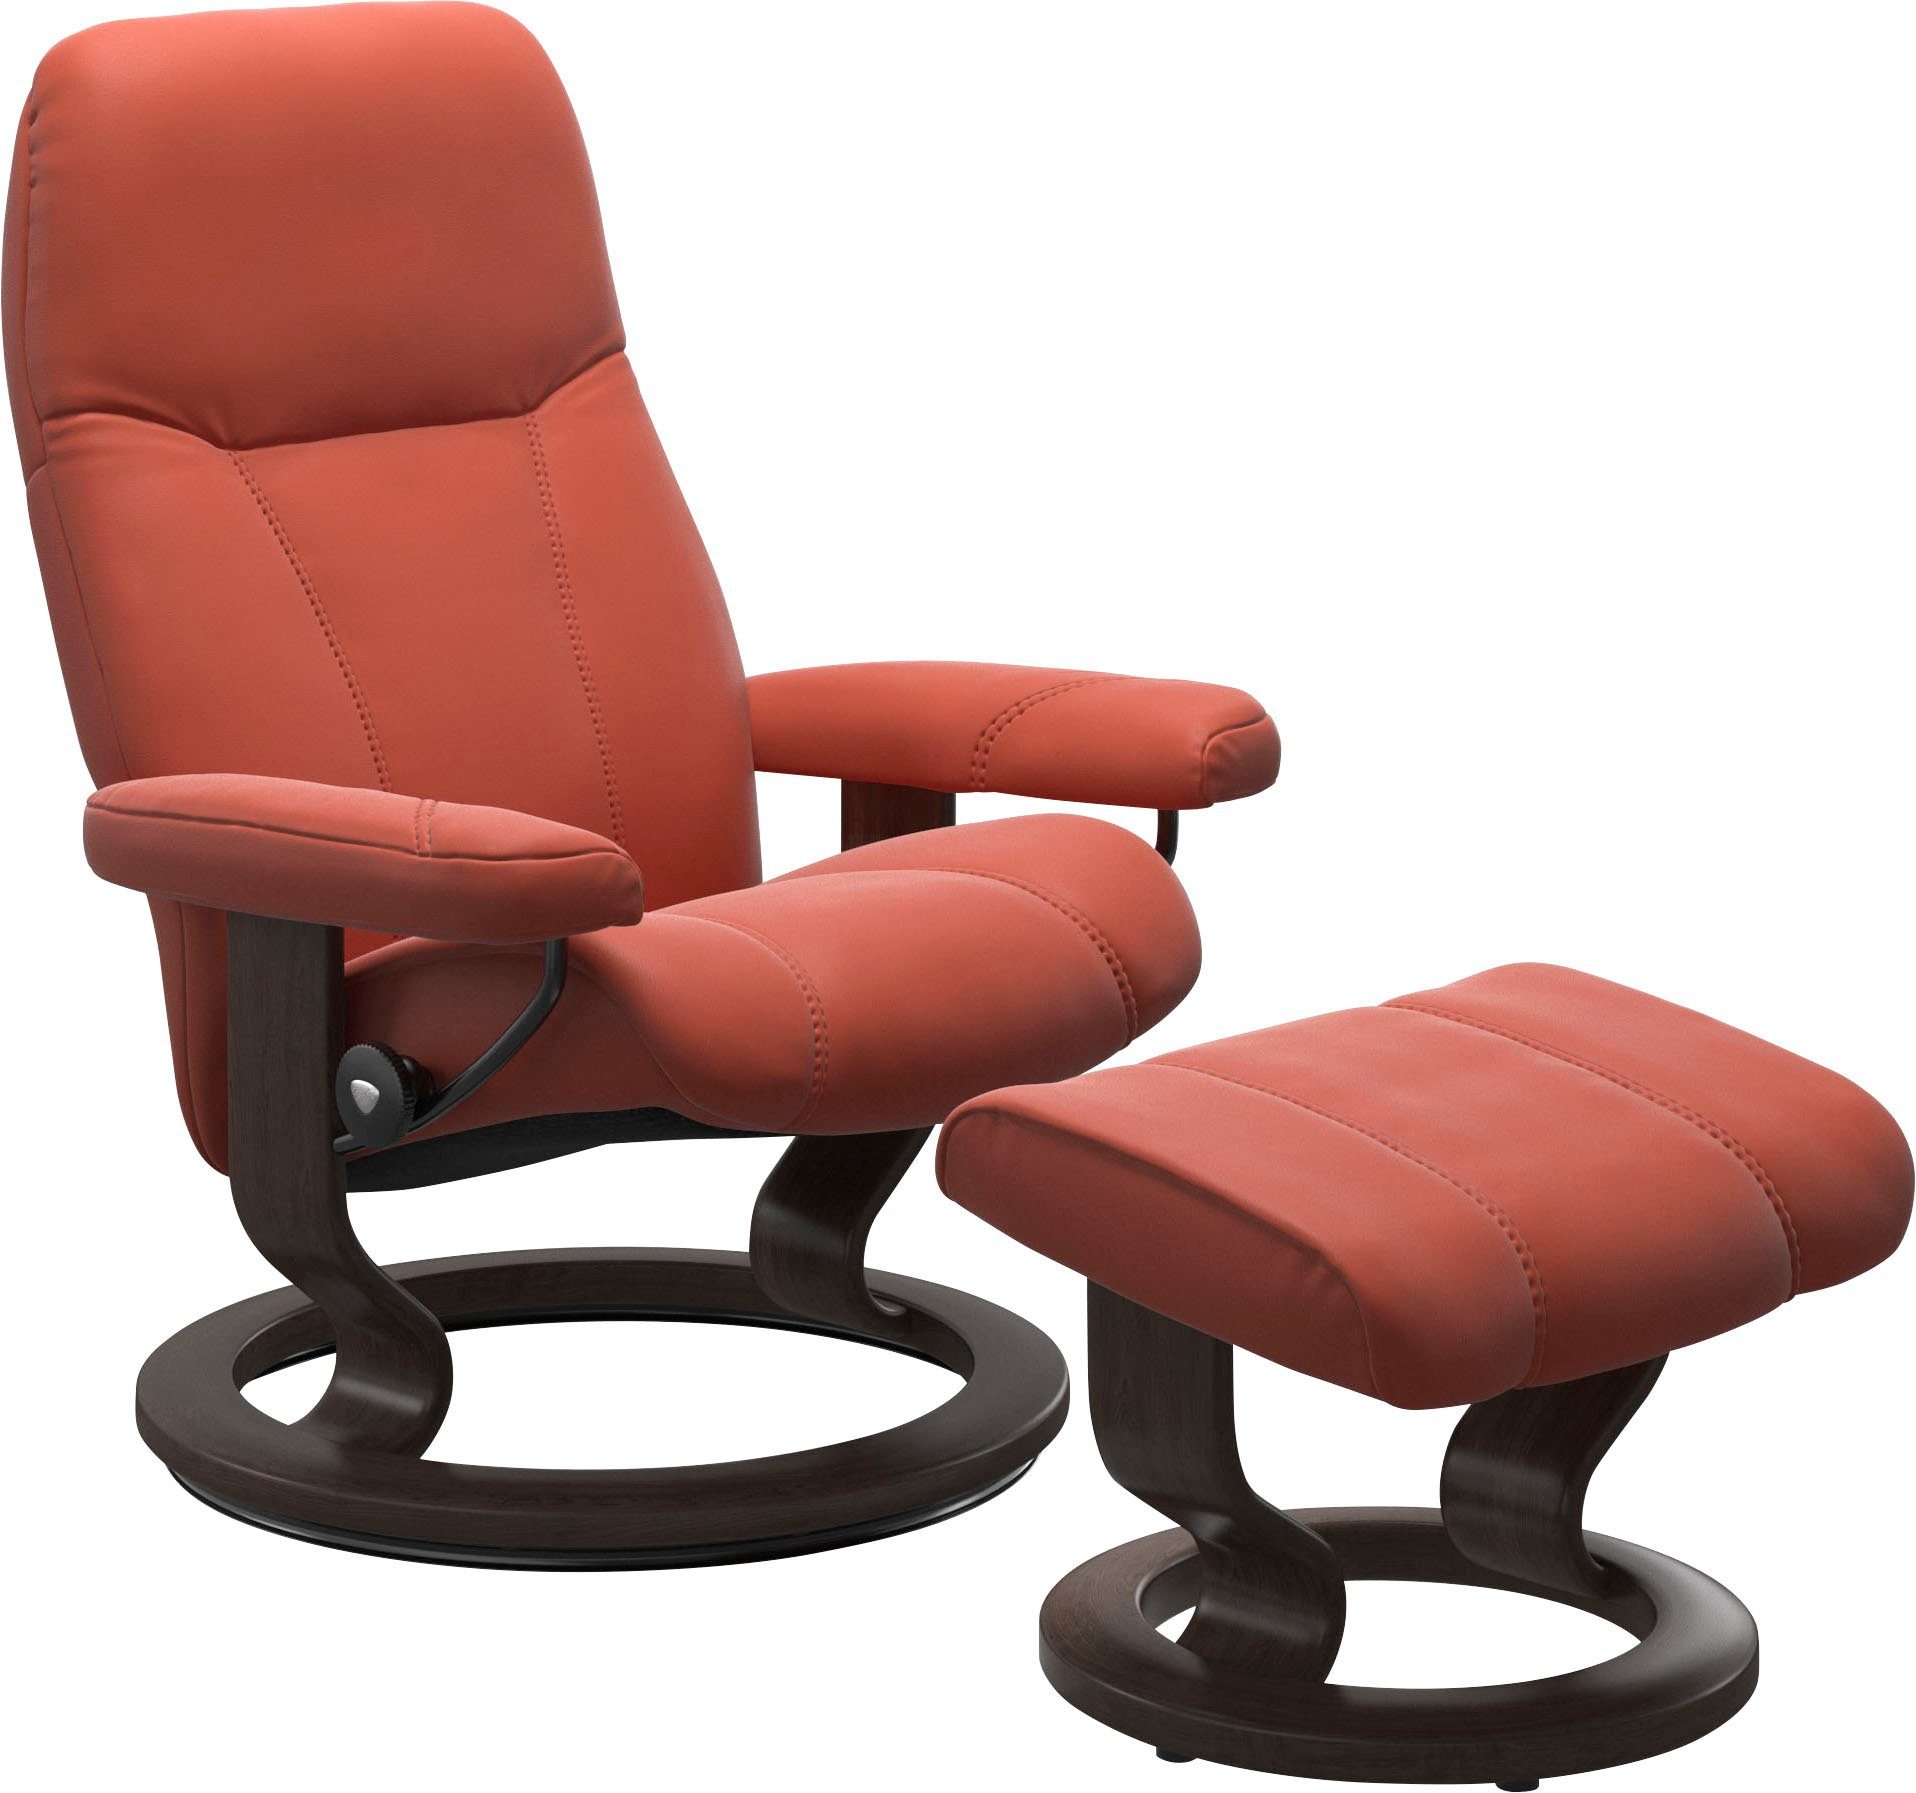 mit Base, Gestell S, Relaxsessel Classic Stressless® Größe Wenge Consul,